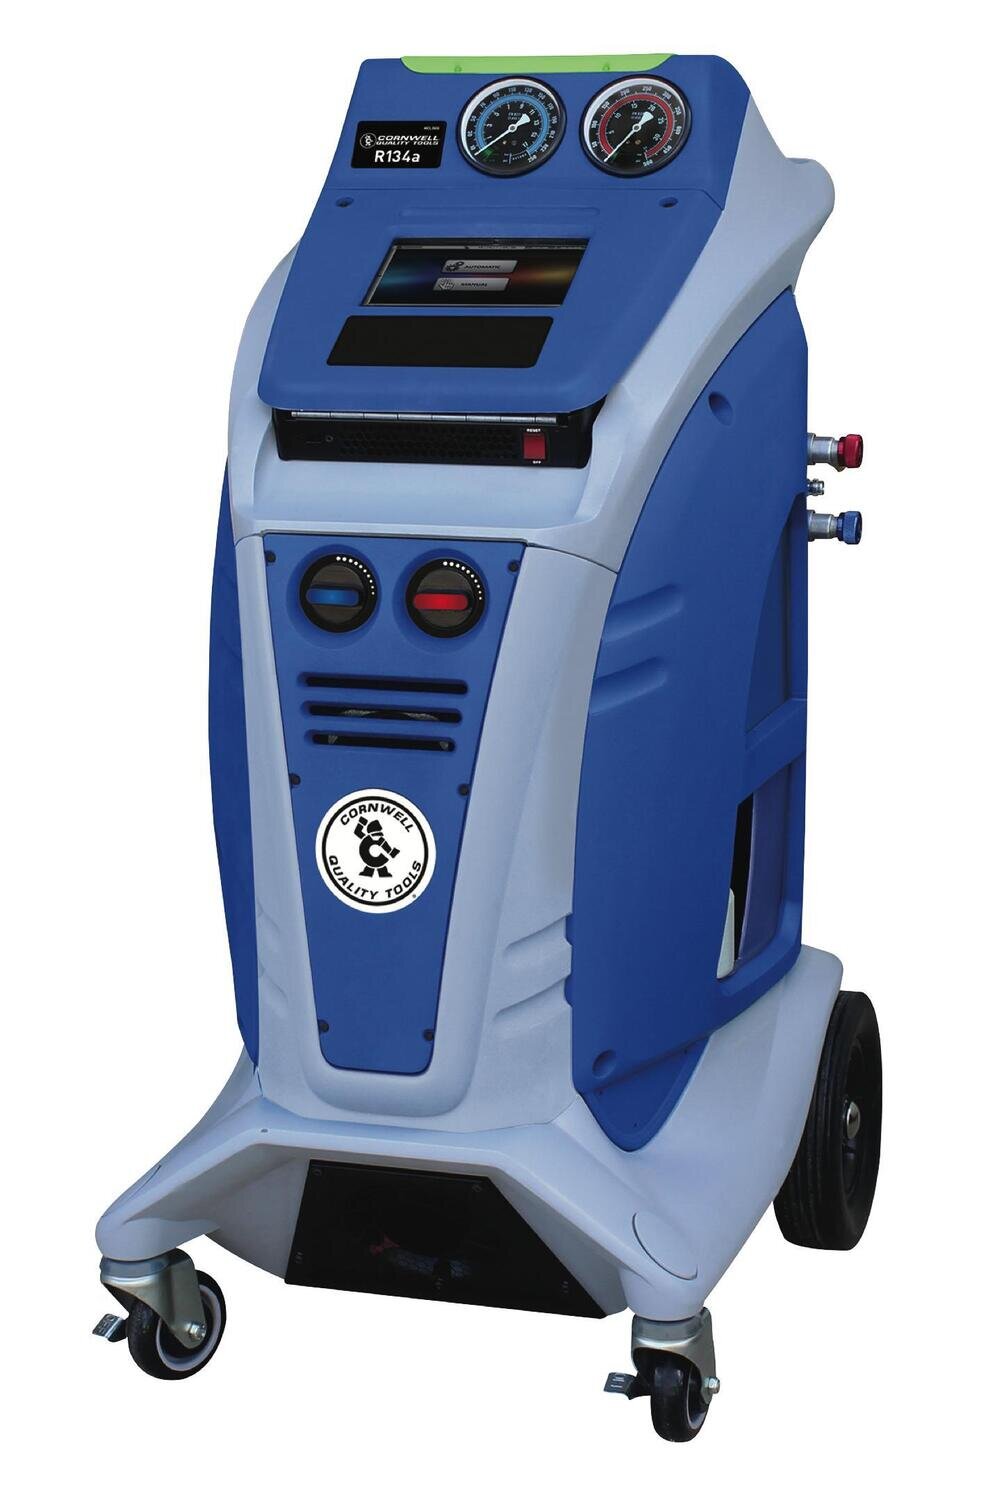 MCL3000 - R134a & Hybrid Recovery, Recycle, Recharge Machine